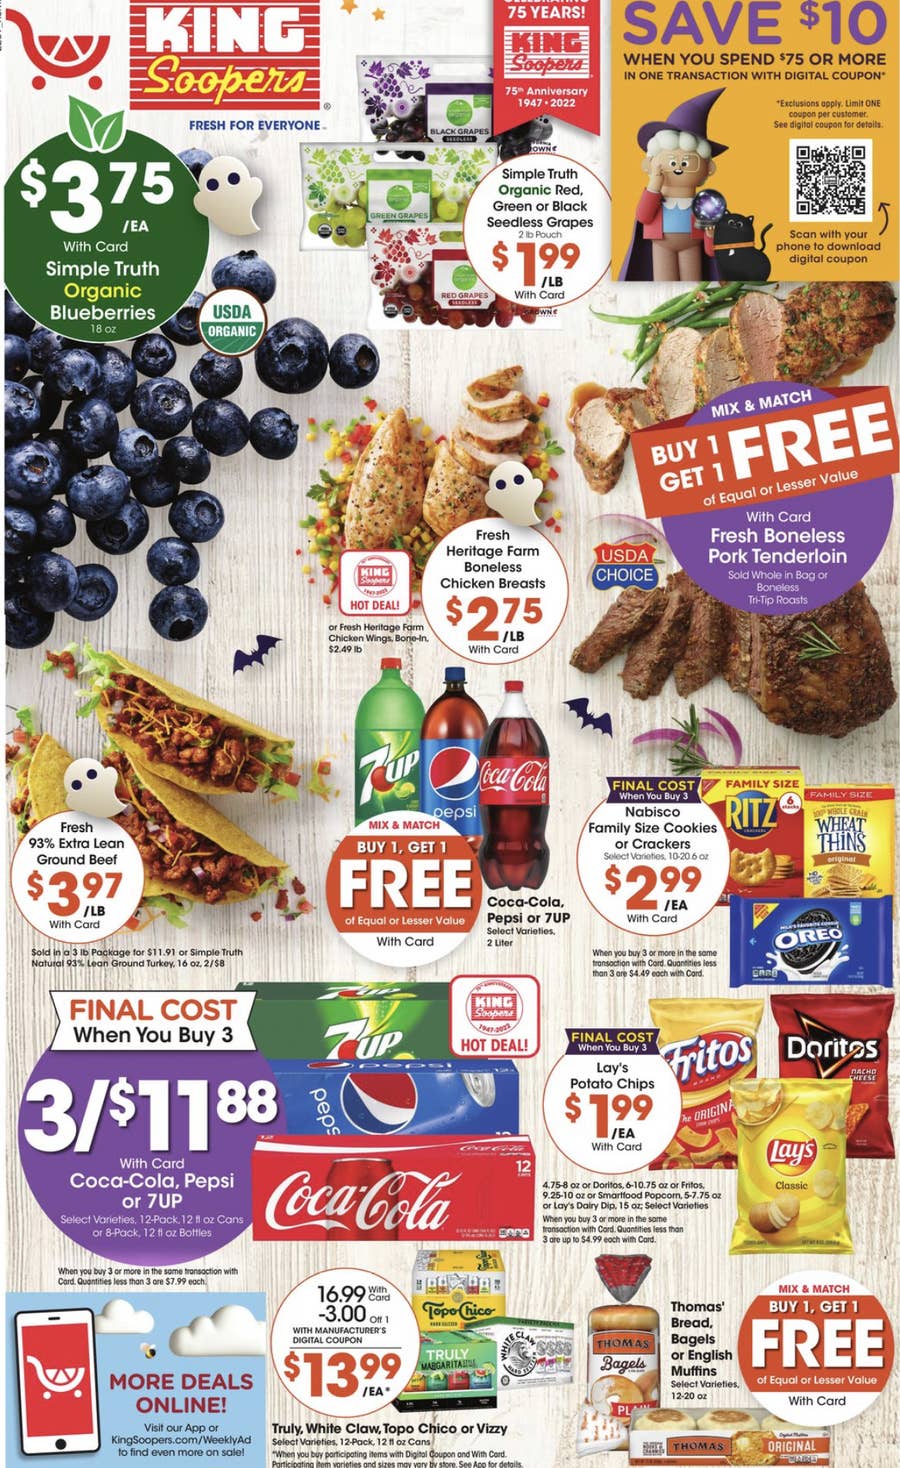 Frugal grocery specials